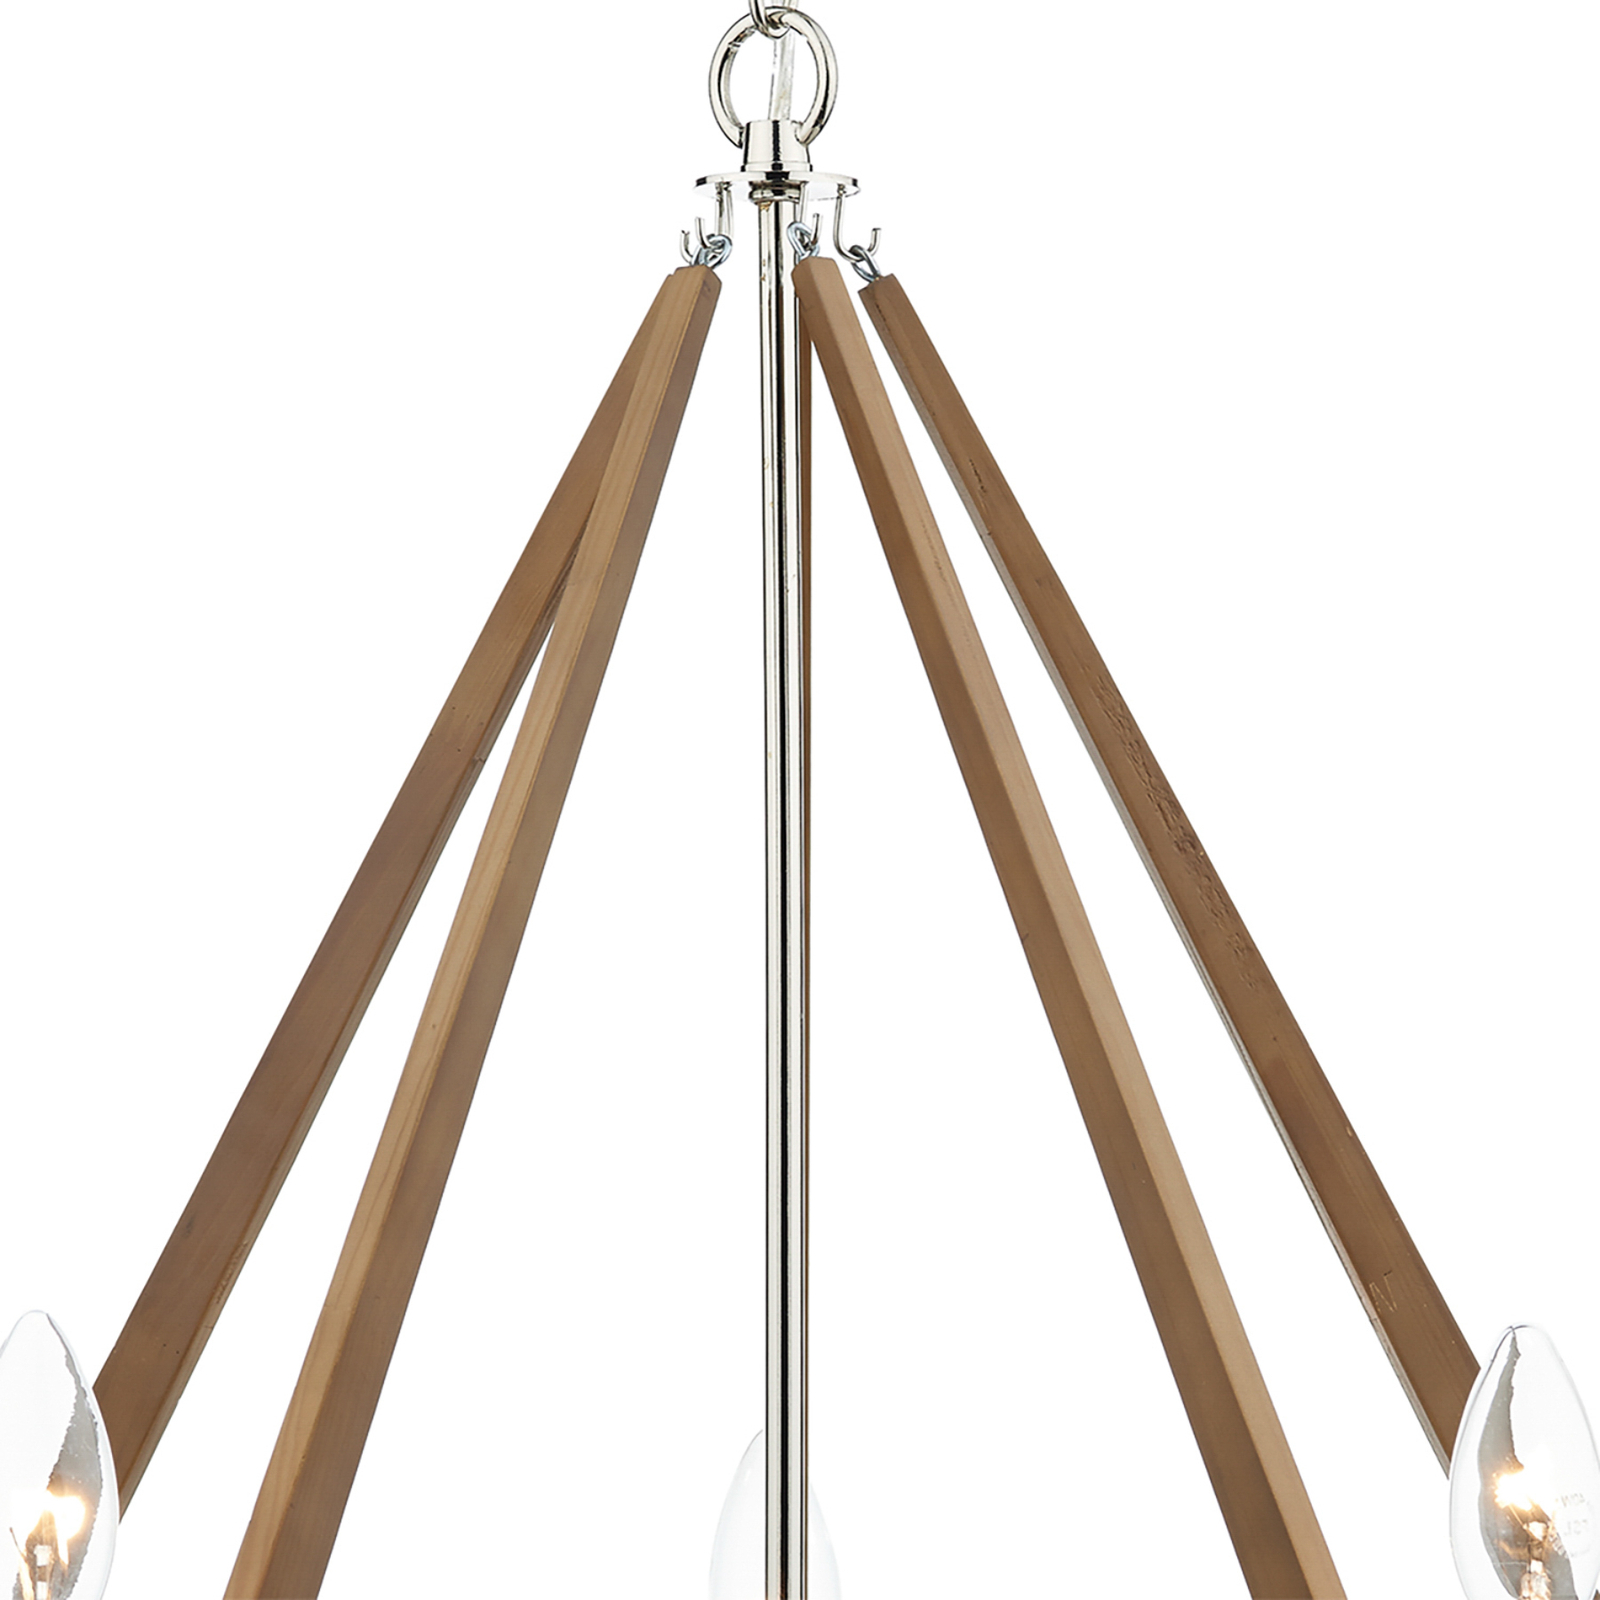 Hotel pendant light in nickel with wooden details